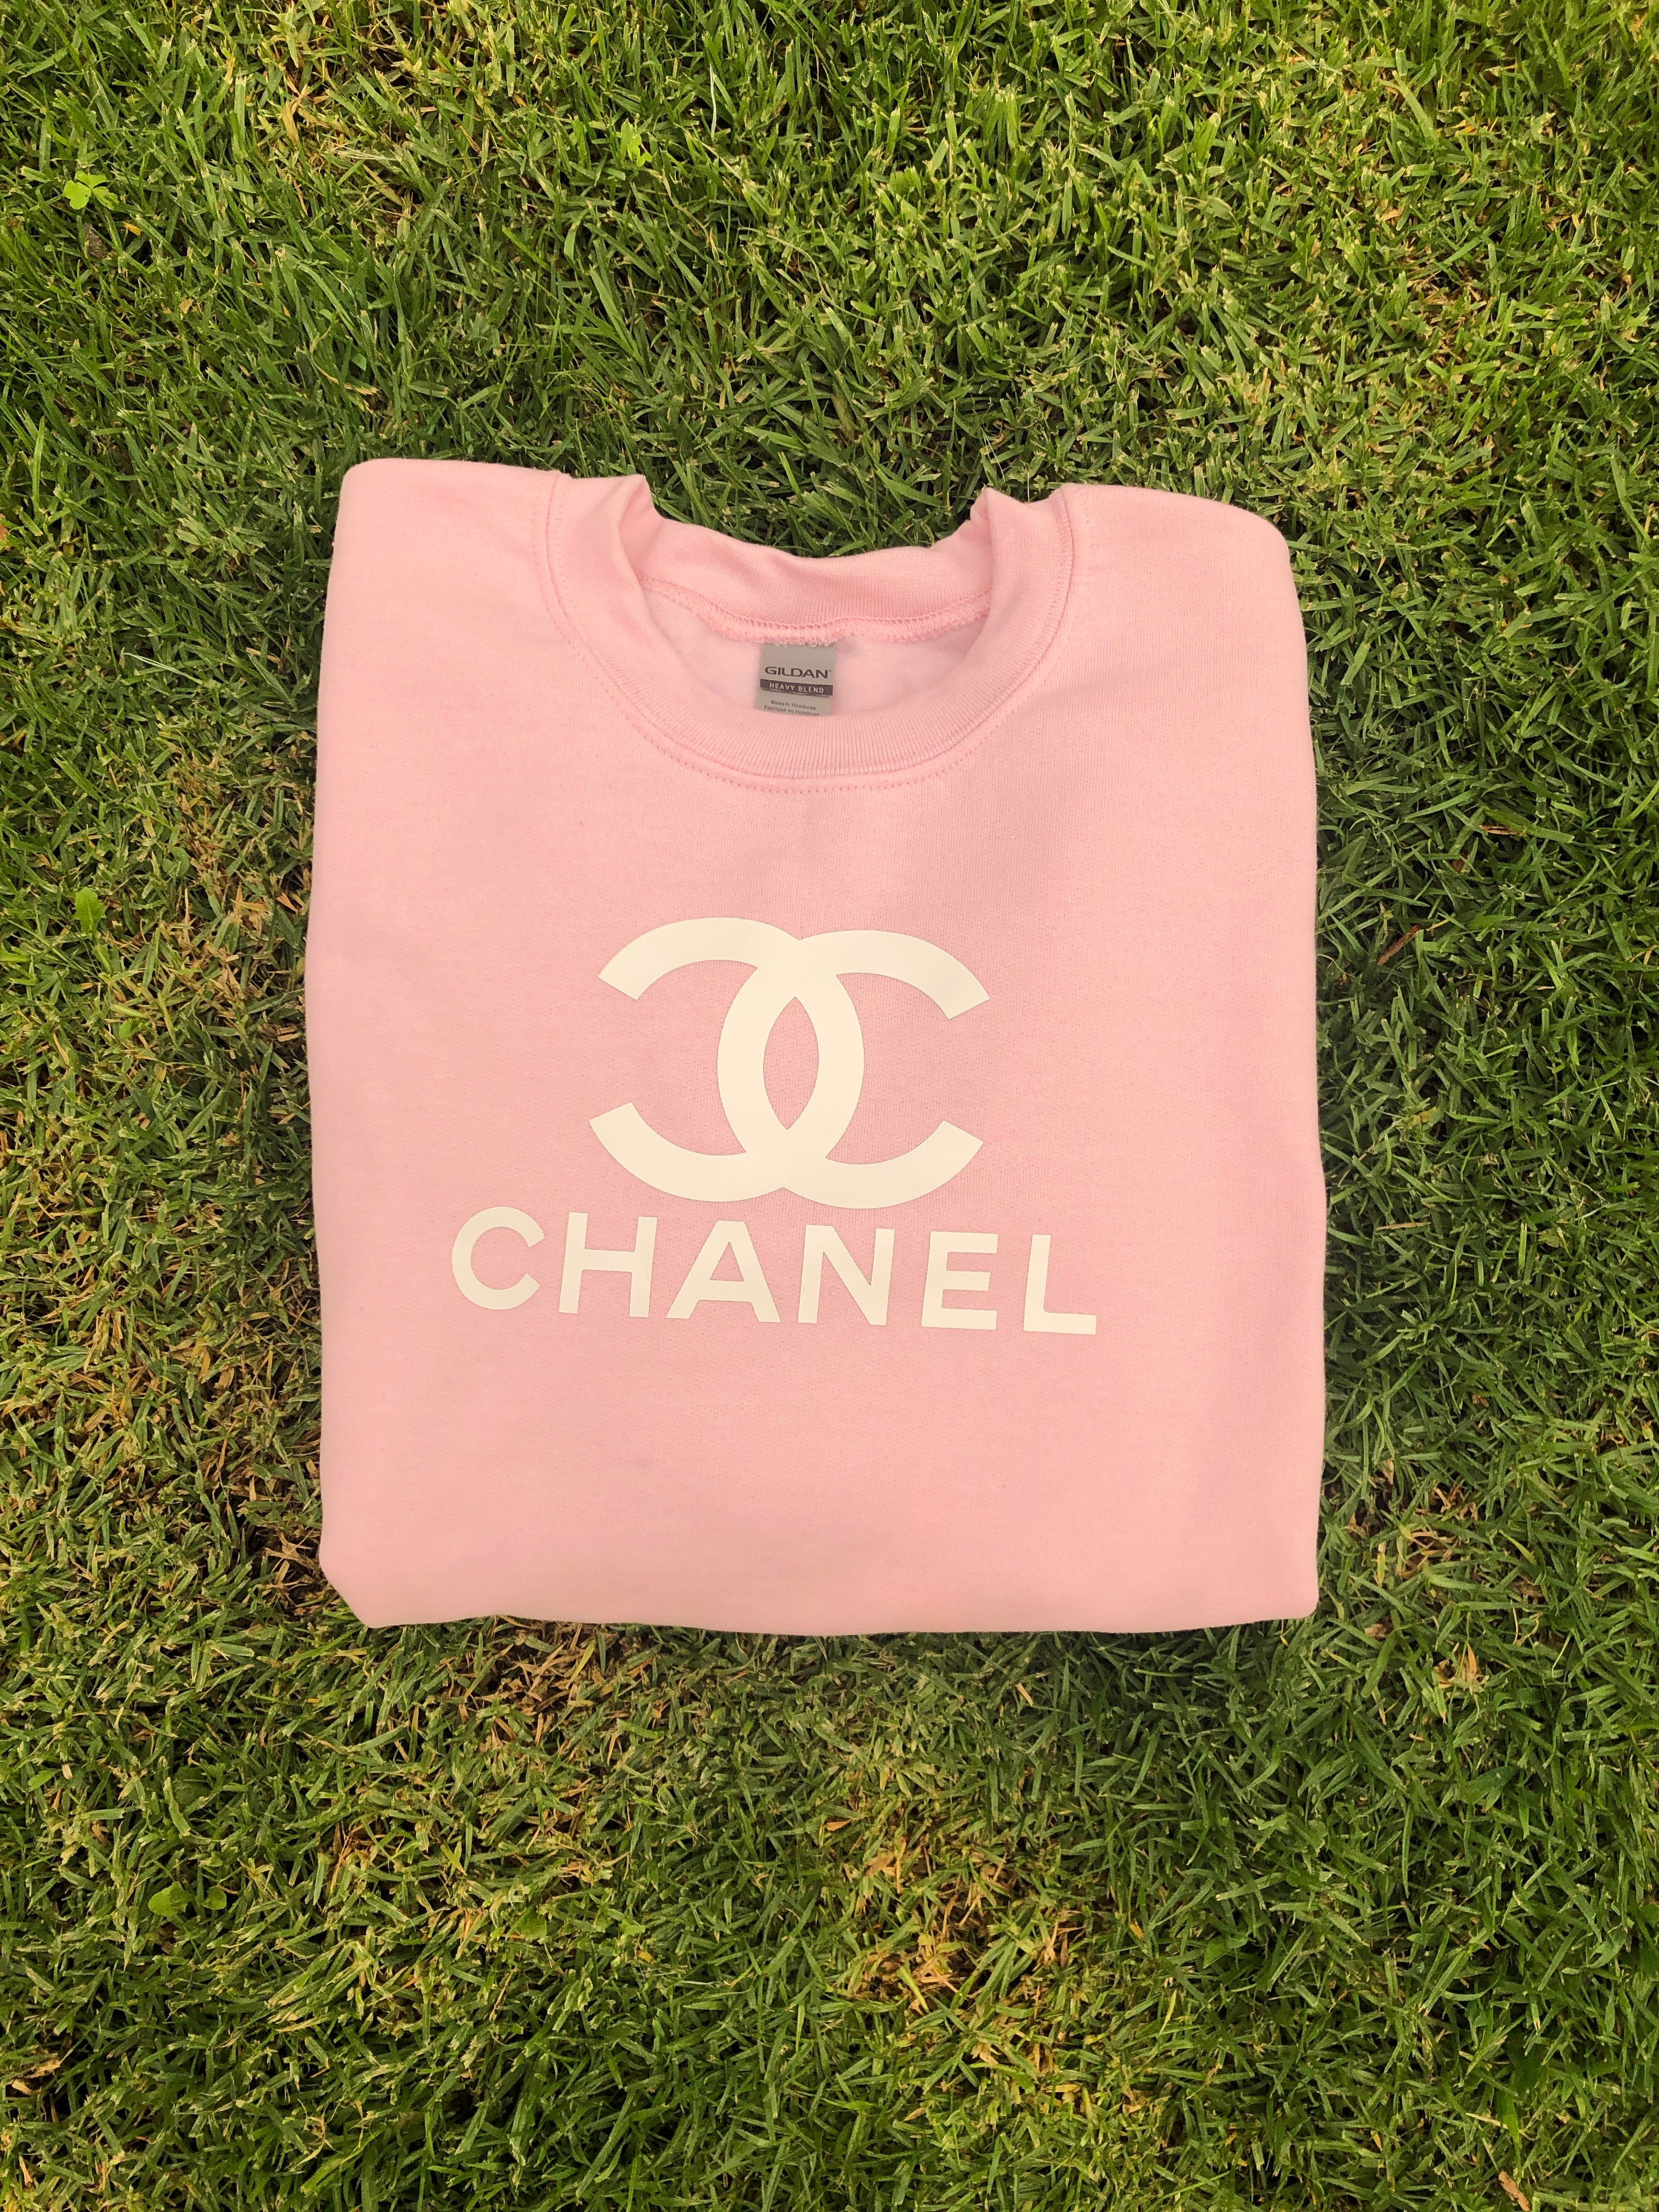 The High Price Chanel Formula 1 T-Shirt Astounds the Internet